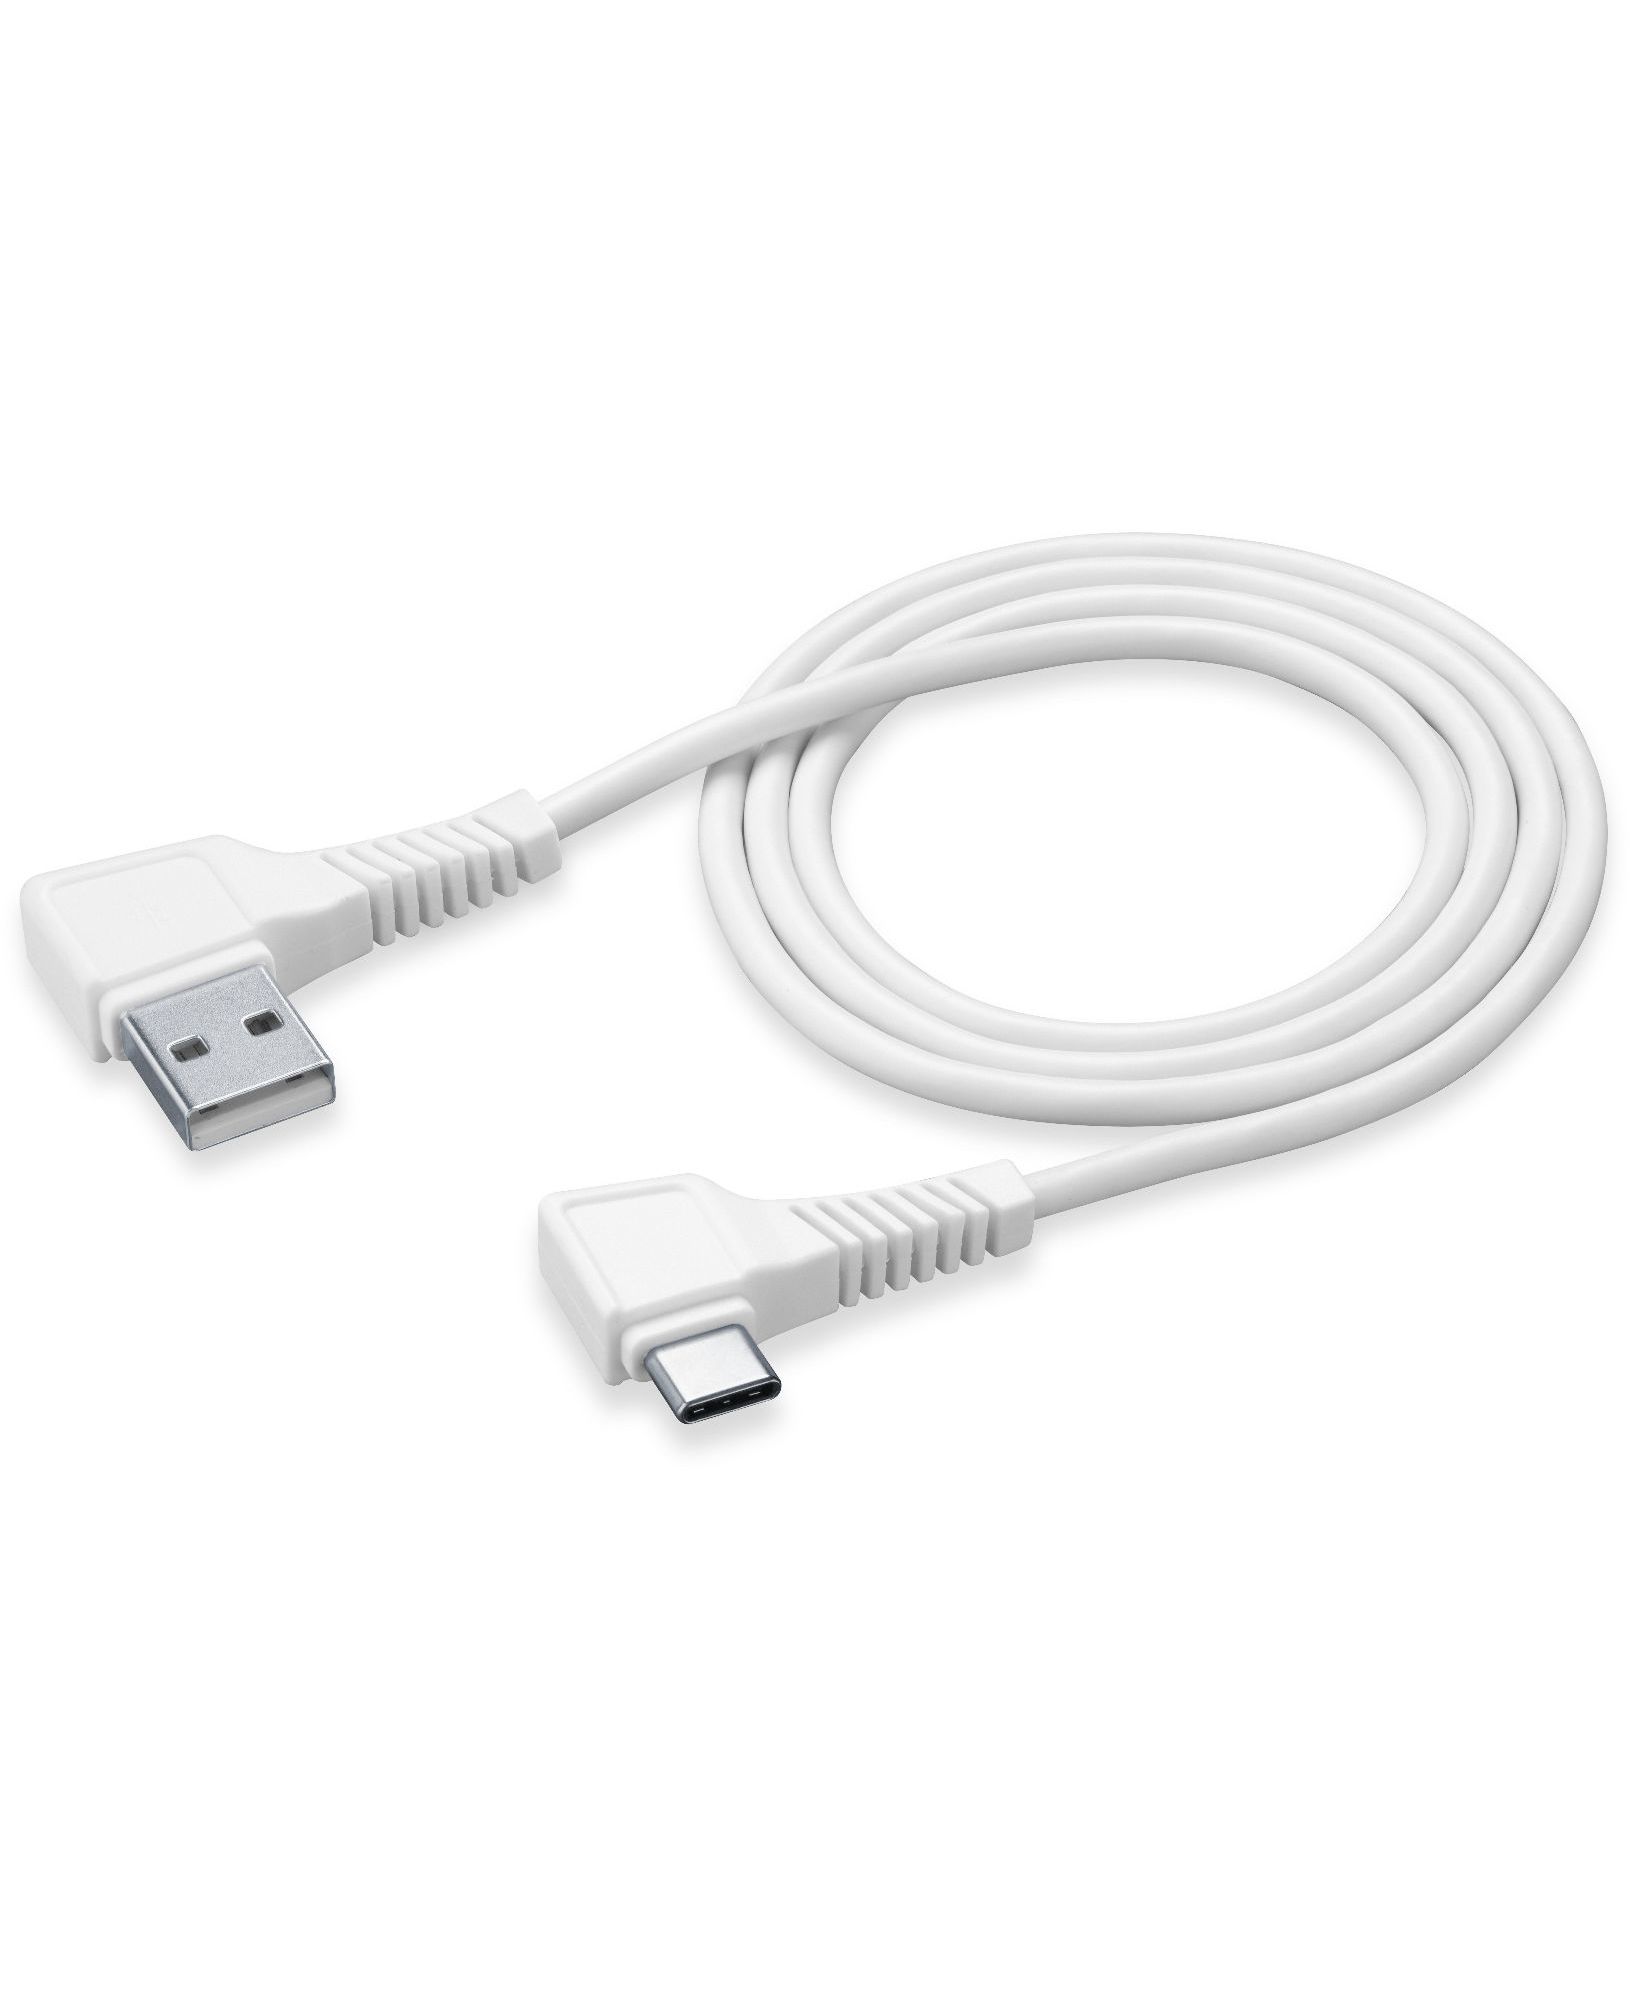 Usb cable, usb-c square connector 1,2m, white